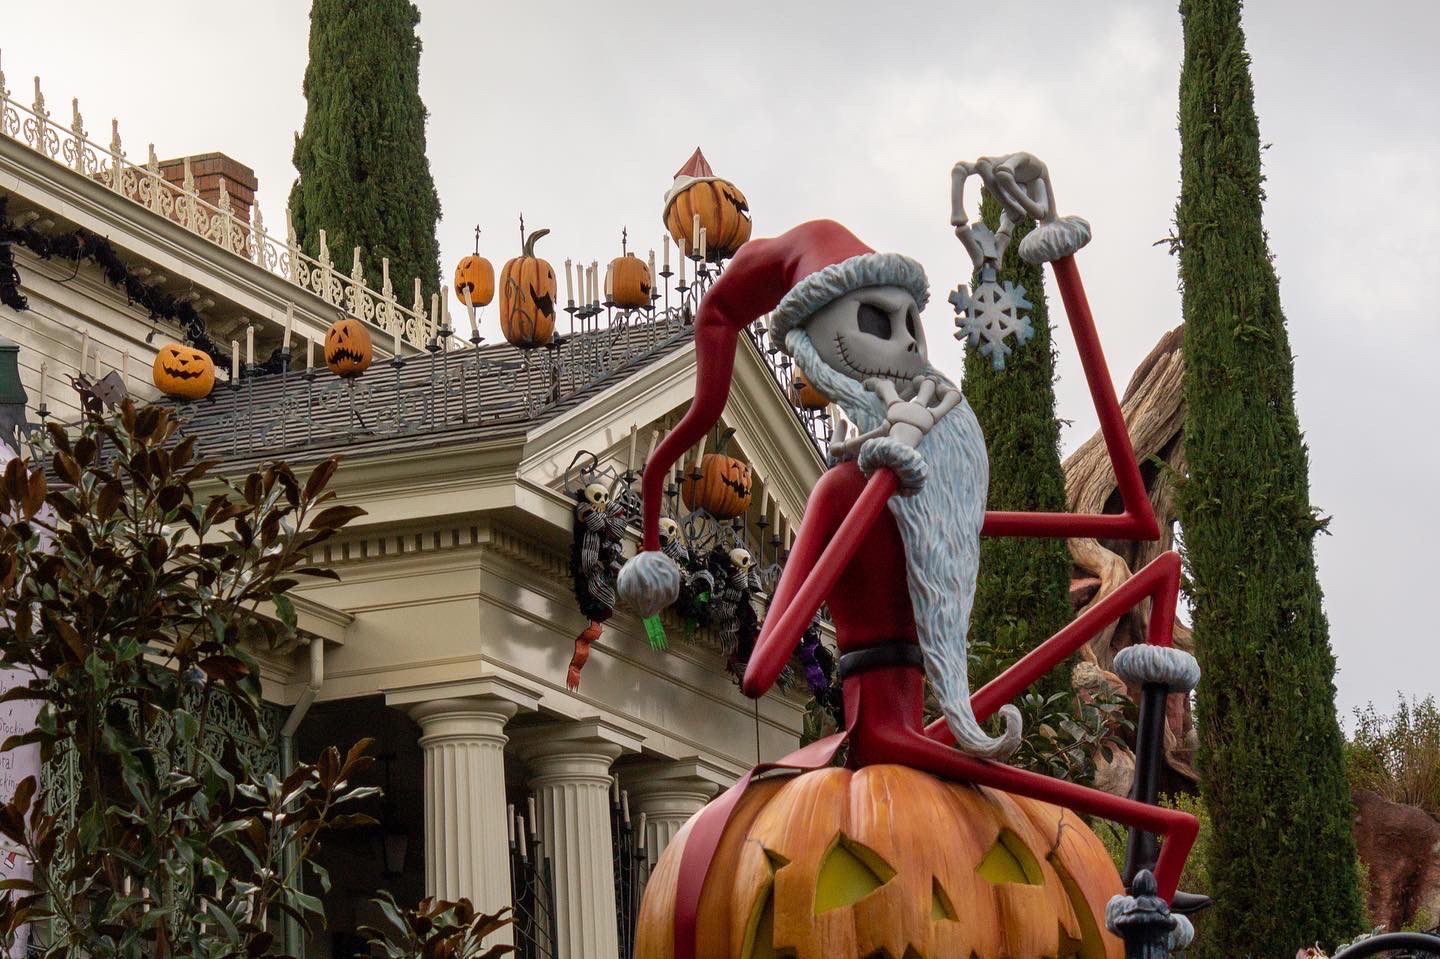 The thin skeleton figure of Jack Skellington, dressed in a red Santa outfit, perches on top of the gate to the Haunted Mansion; behind him, the white New Orleans-style mansion is decorated with black ribbons and orange jack o' lanterns